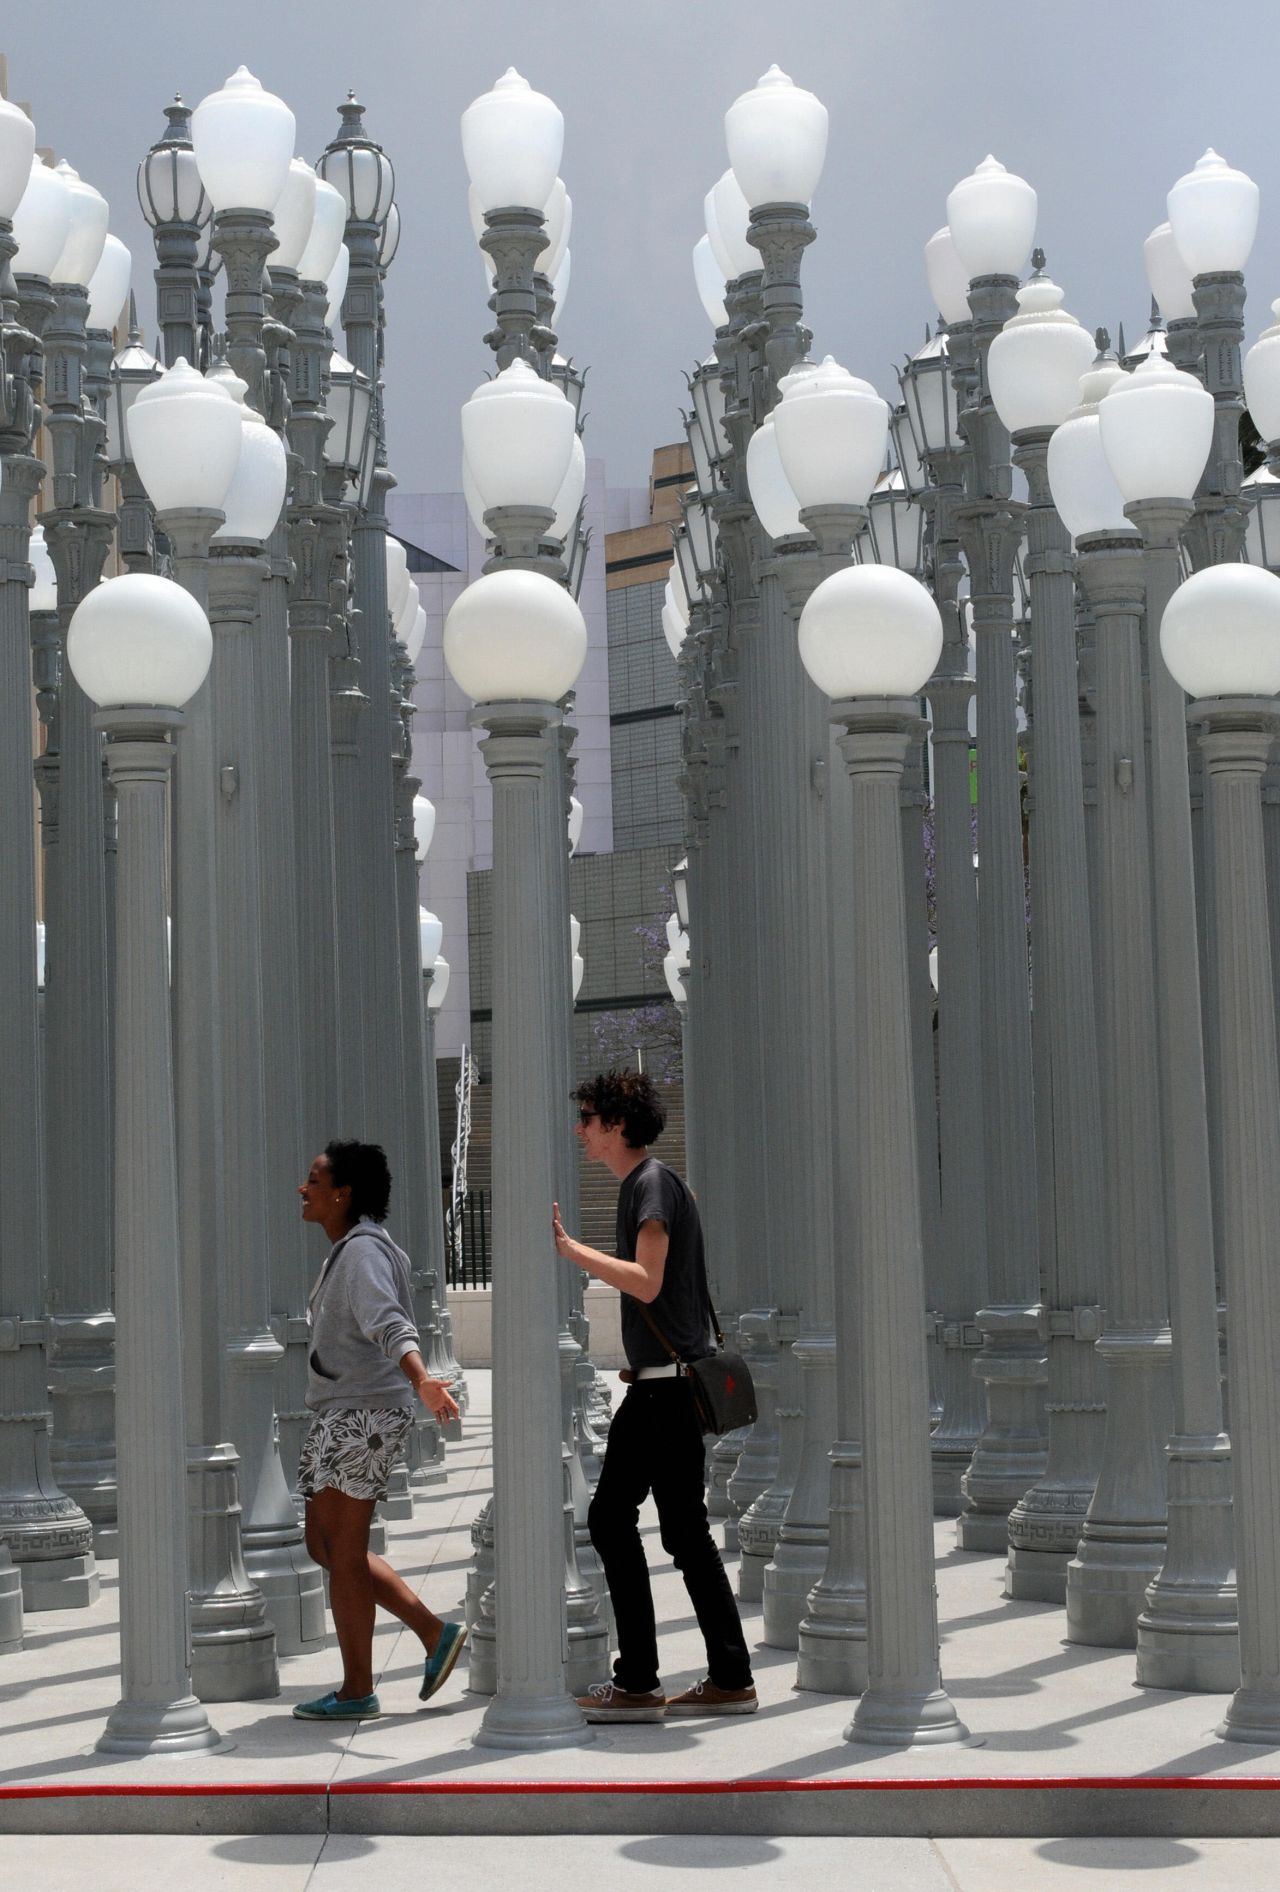 'Urban Light', 202 cast-iron streetlamps restored by LA artist Chris Burden, in front of the LACMA museum in Los Angeles. 